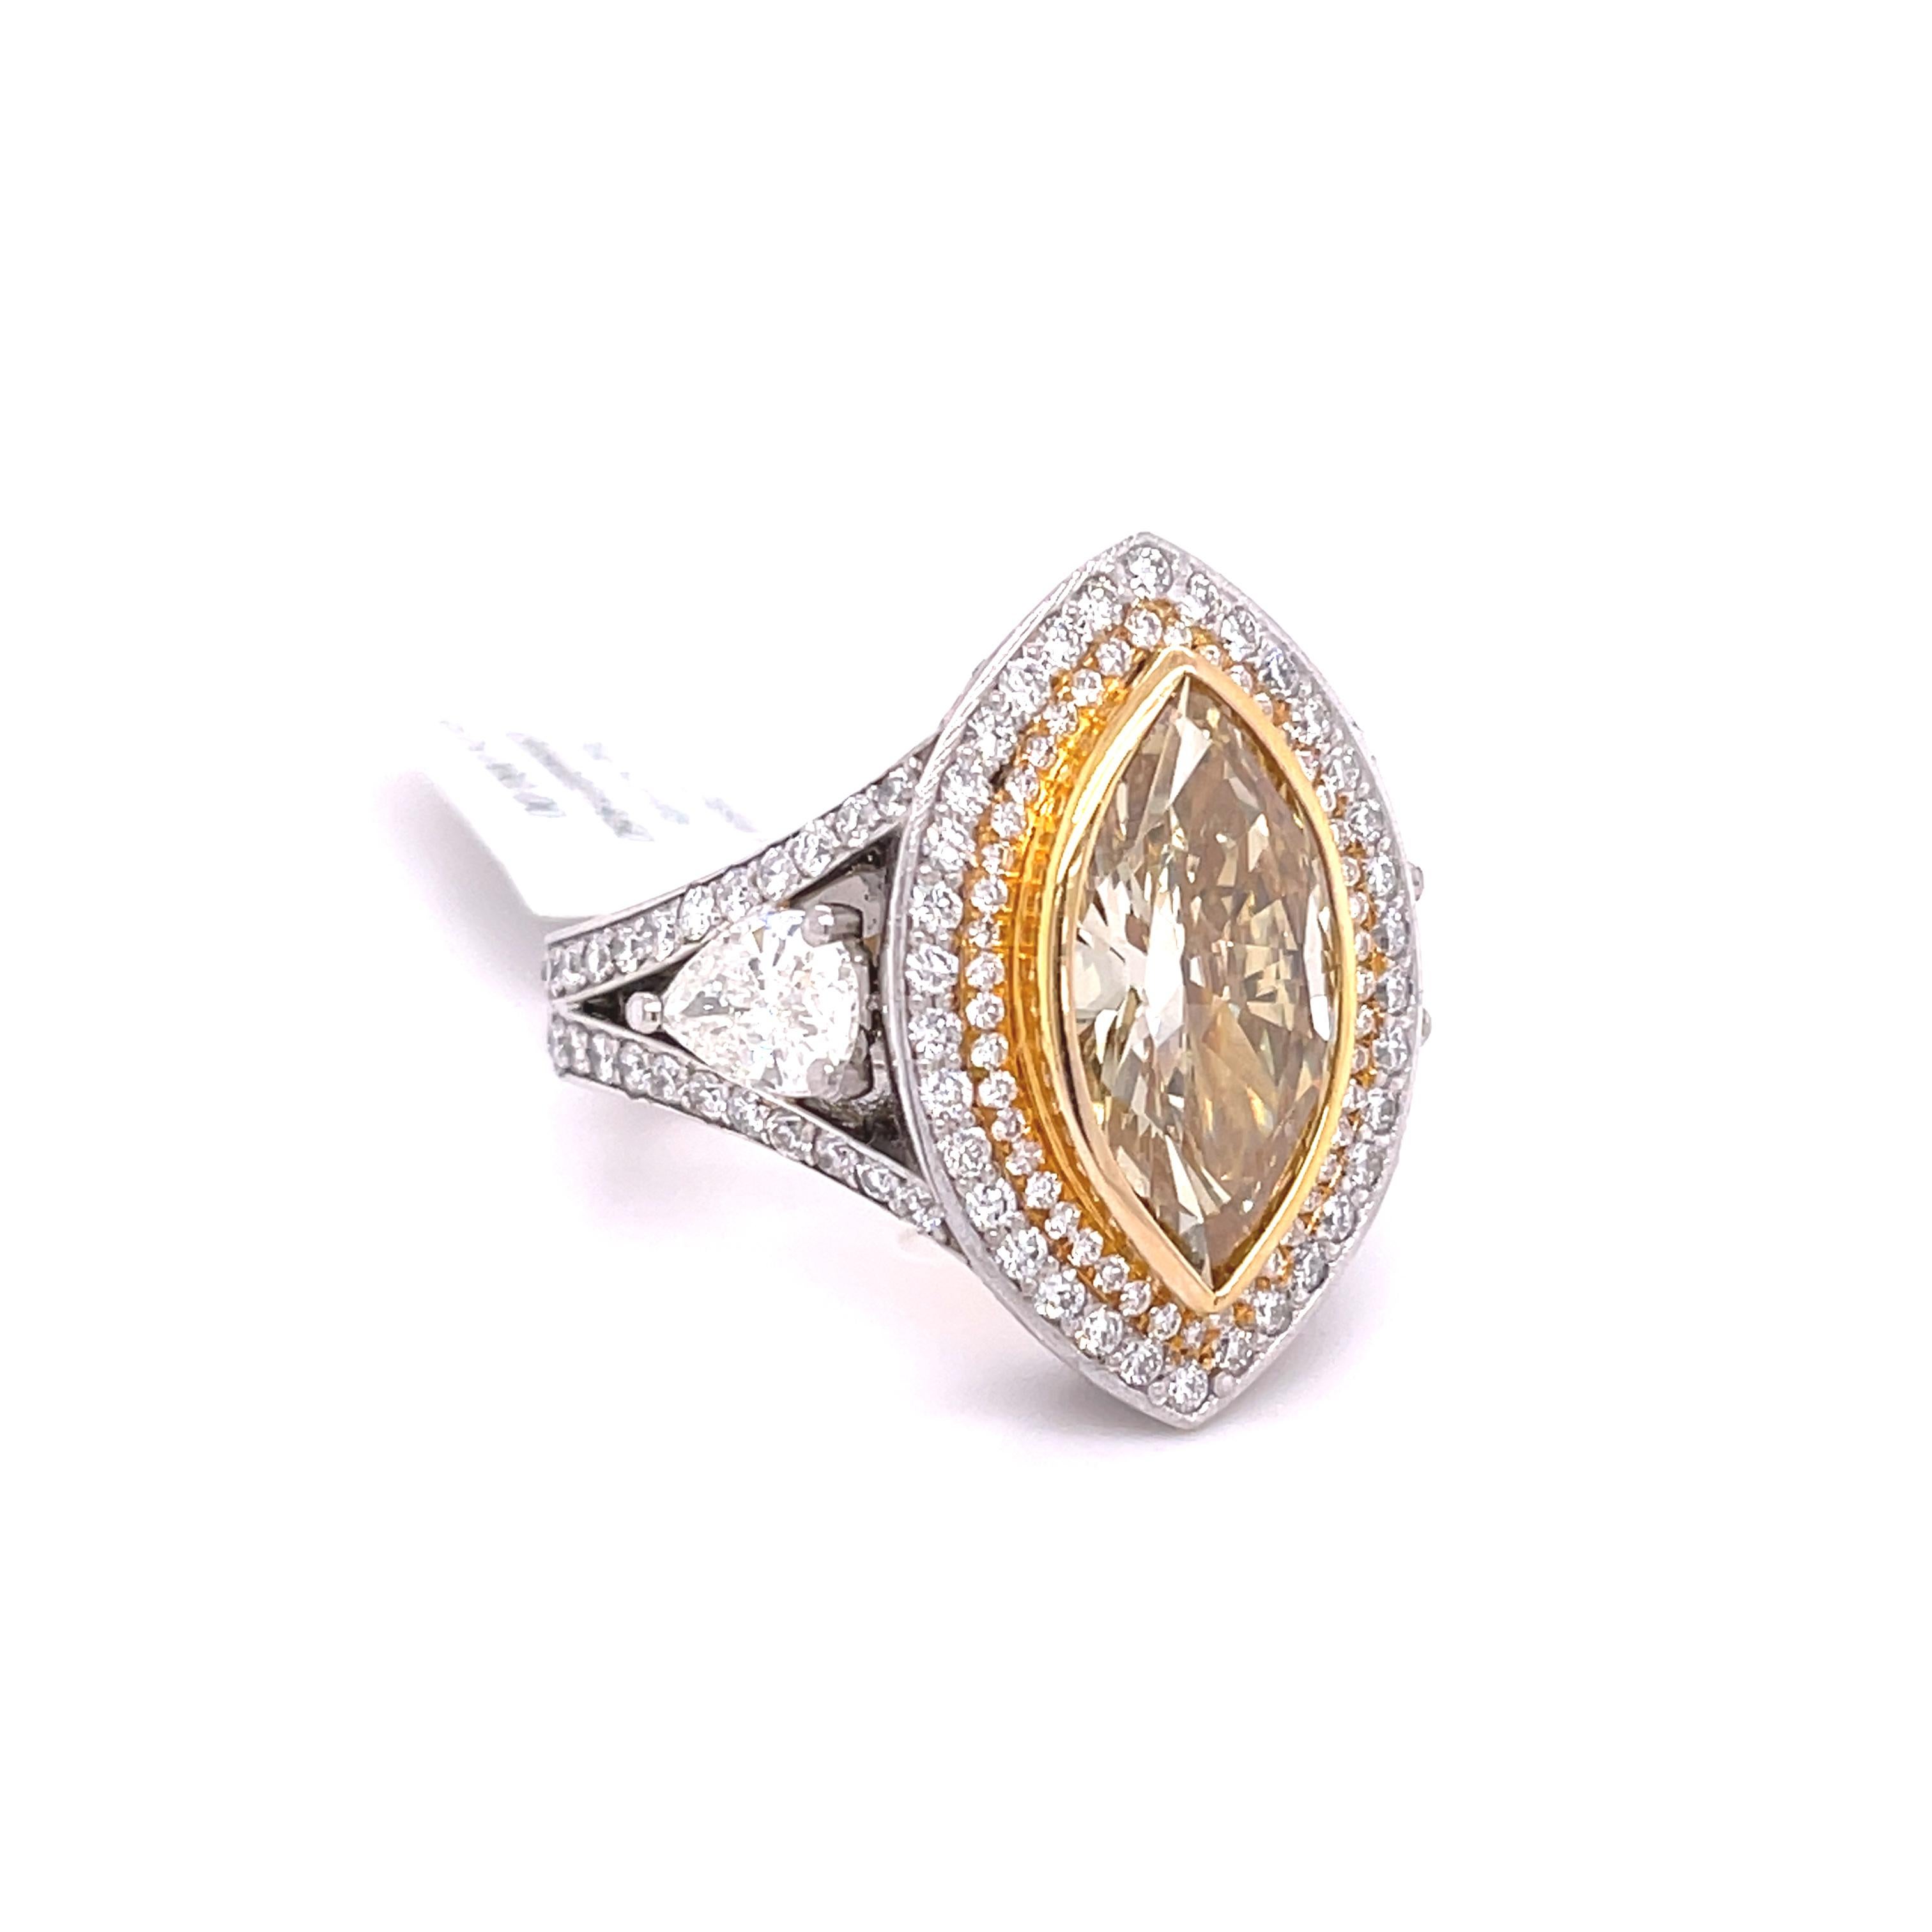 Apart of our collection of rare and unique diamonds. This ring presents a beautiful canary diamond at its center, its bezel setting allows the diamonds bright and vibrant yellow colors to be seen in its entirety. This diamond is set in platinum and